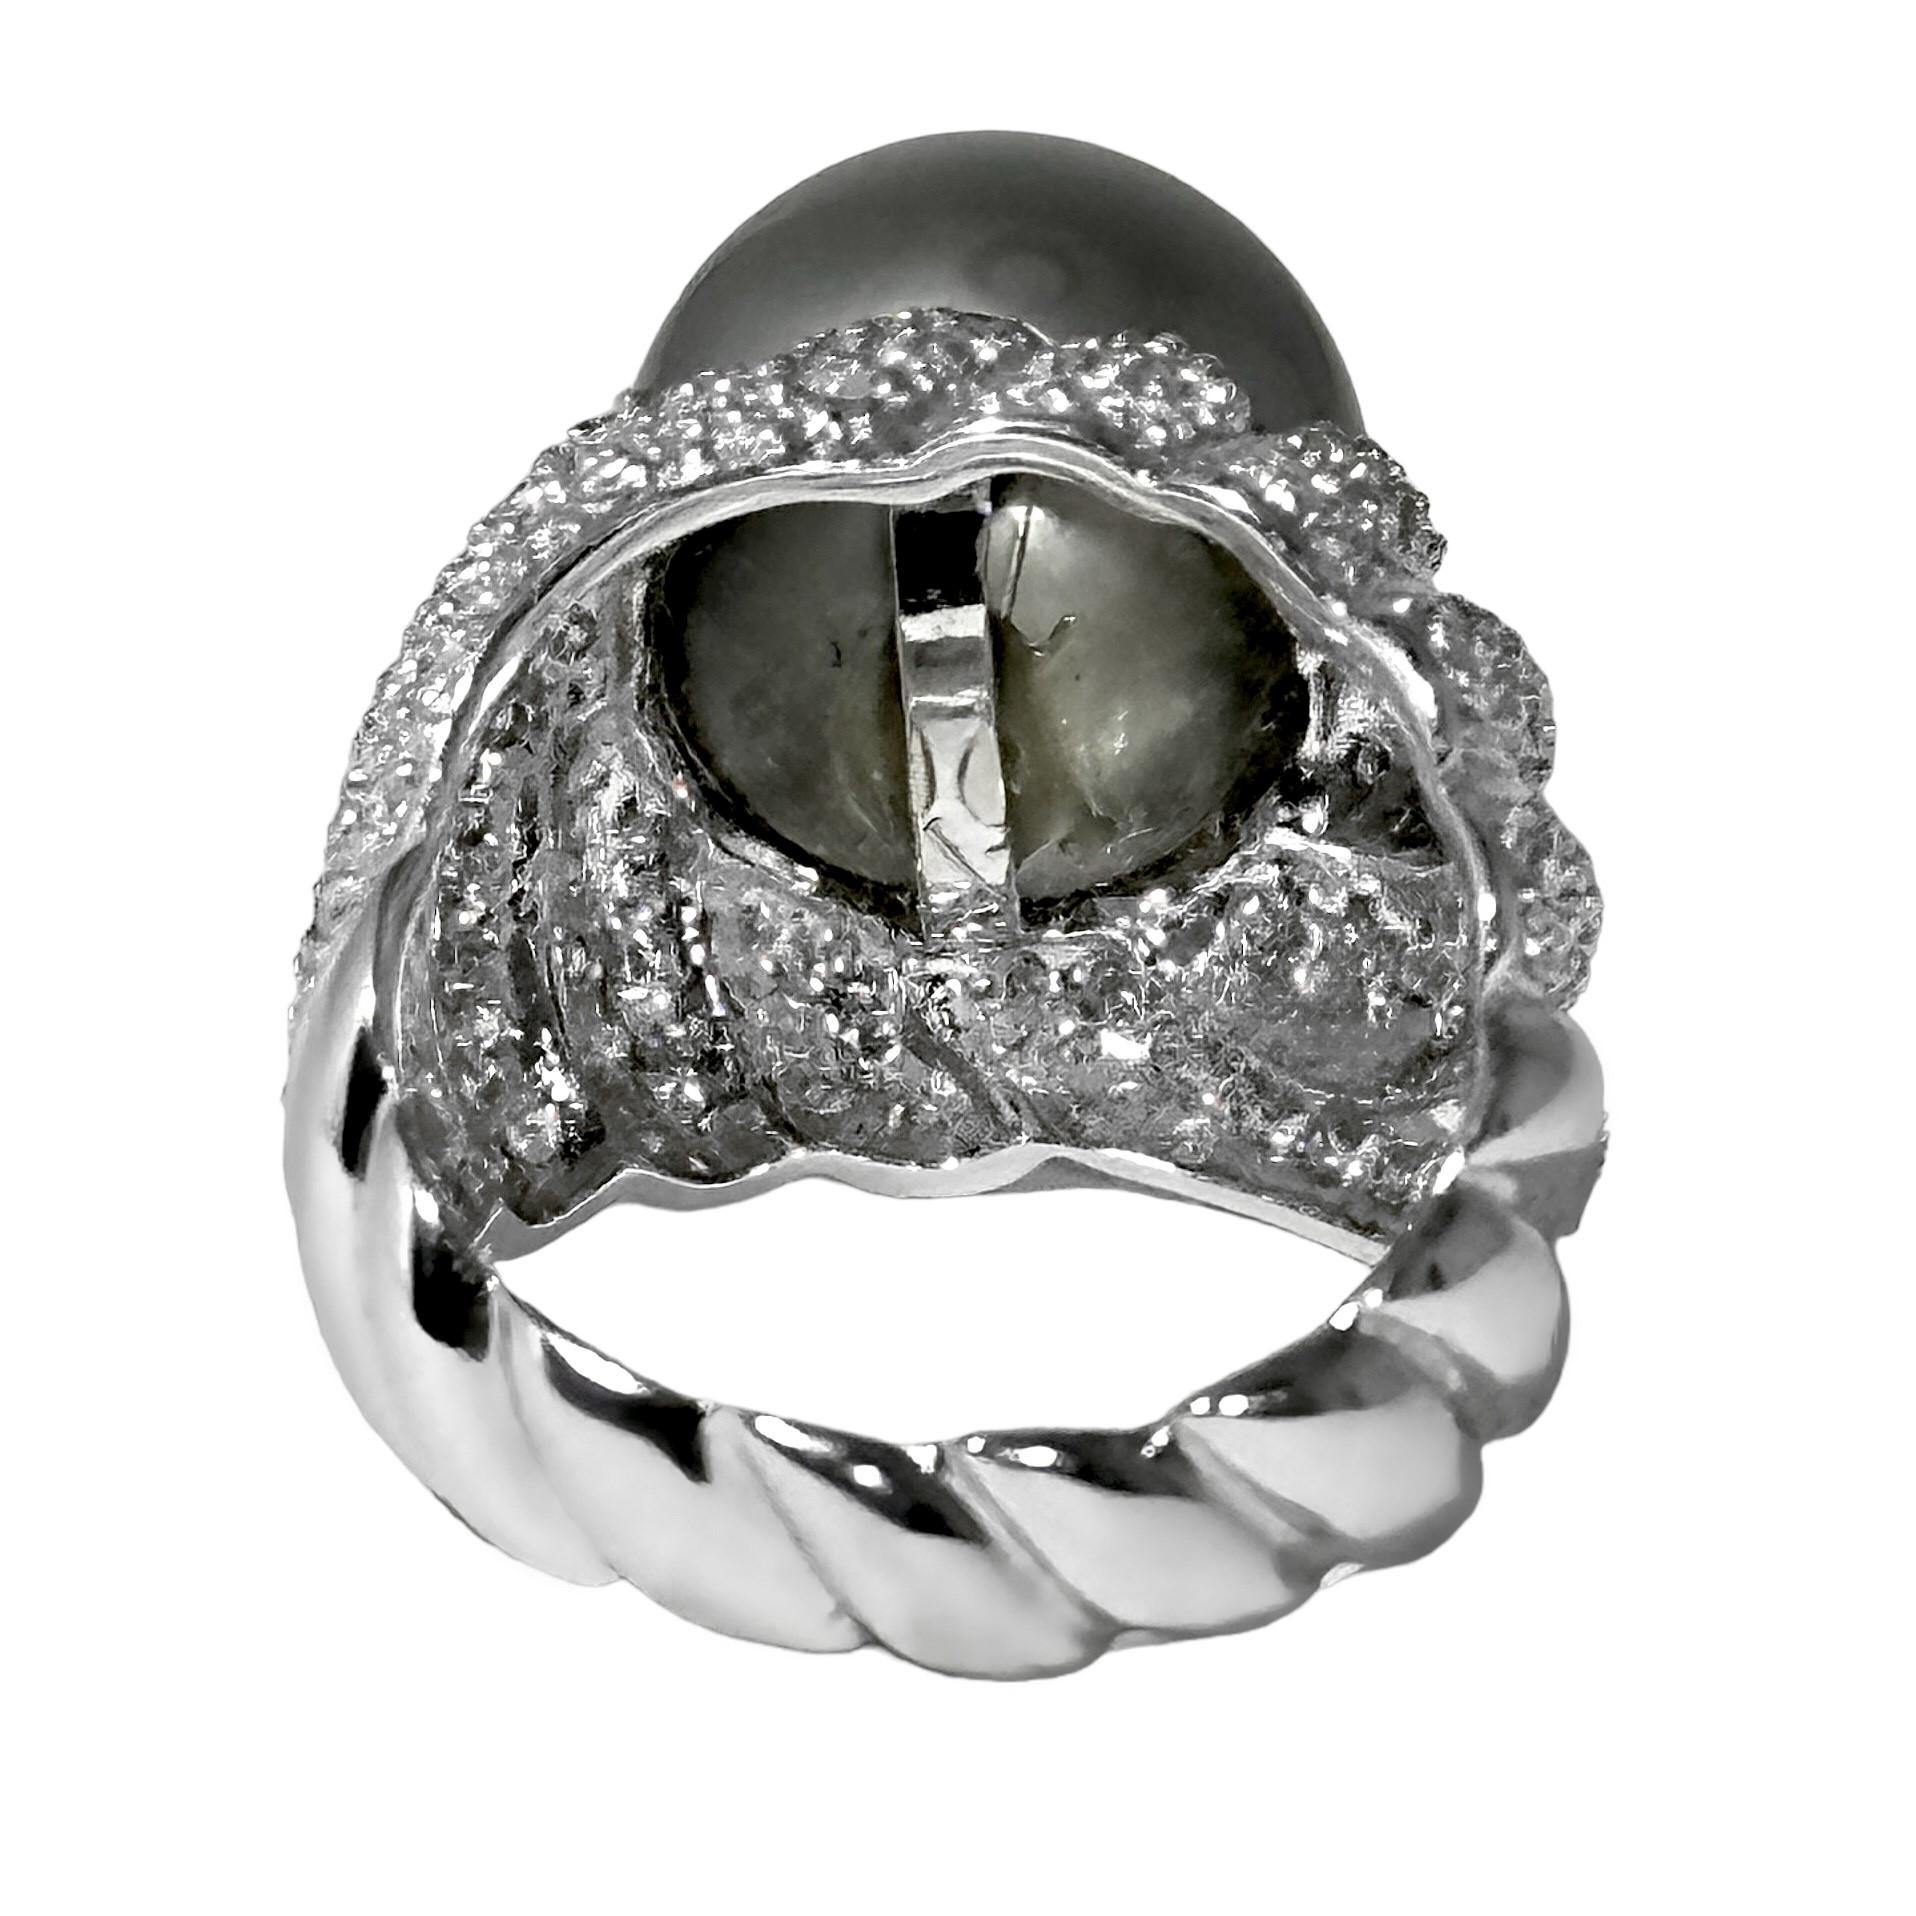 Late 20th Century 18k White Gold, Diamond & Gray Tahitian Pearl Cocktail Ring In Good Condition For Sale In Palm Beach, FL